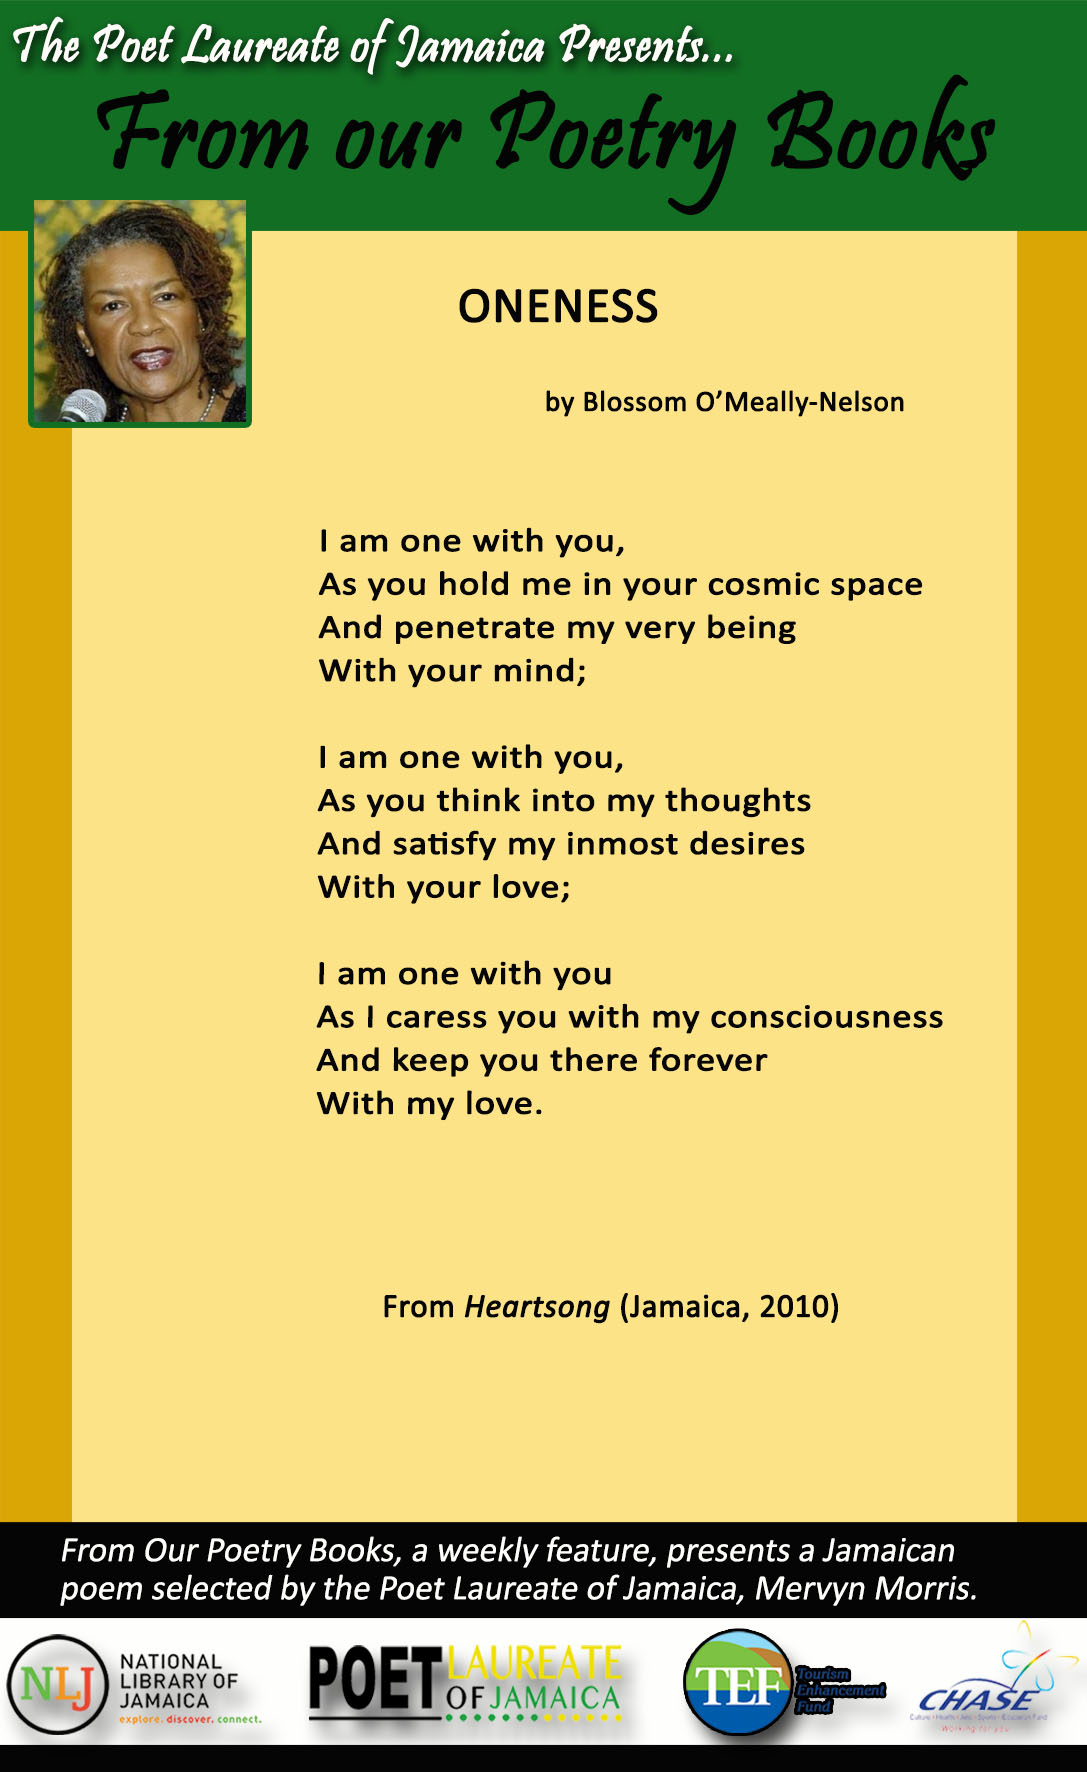 From Our Poetry Books Weekly Feature | The National Library of Jamaica